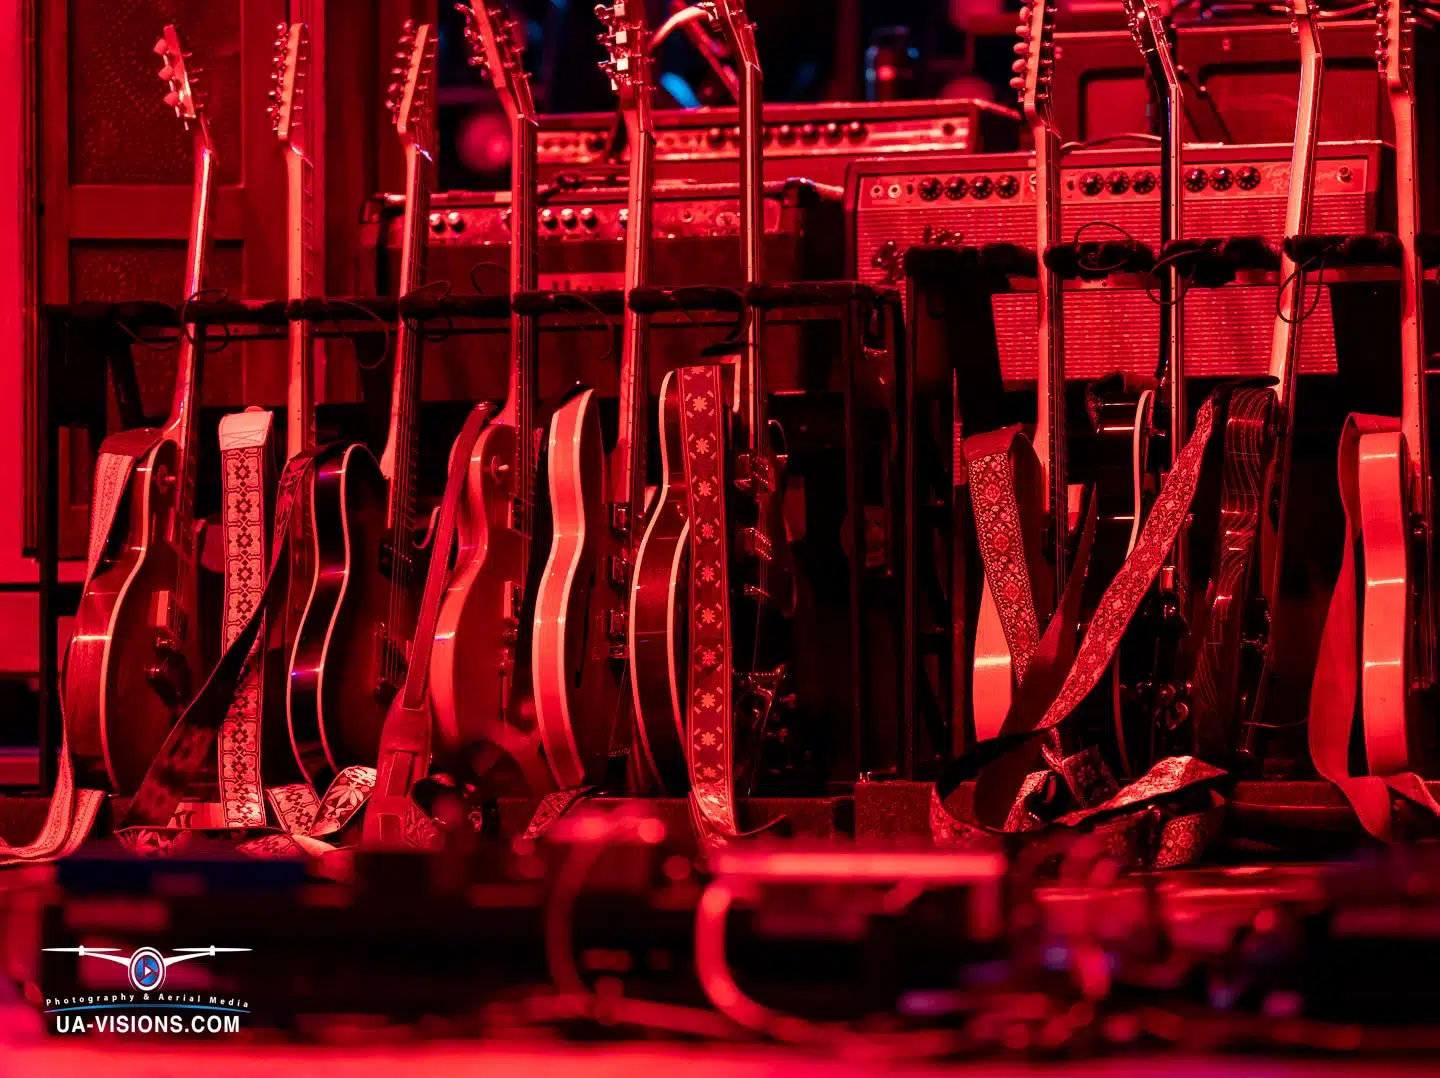 A lineup of guitars bathed in red stage light, silent before the Healing Appalachia concert crescendo.